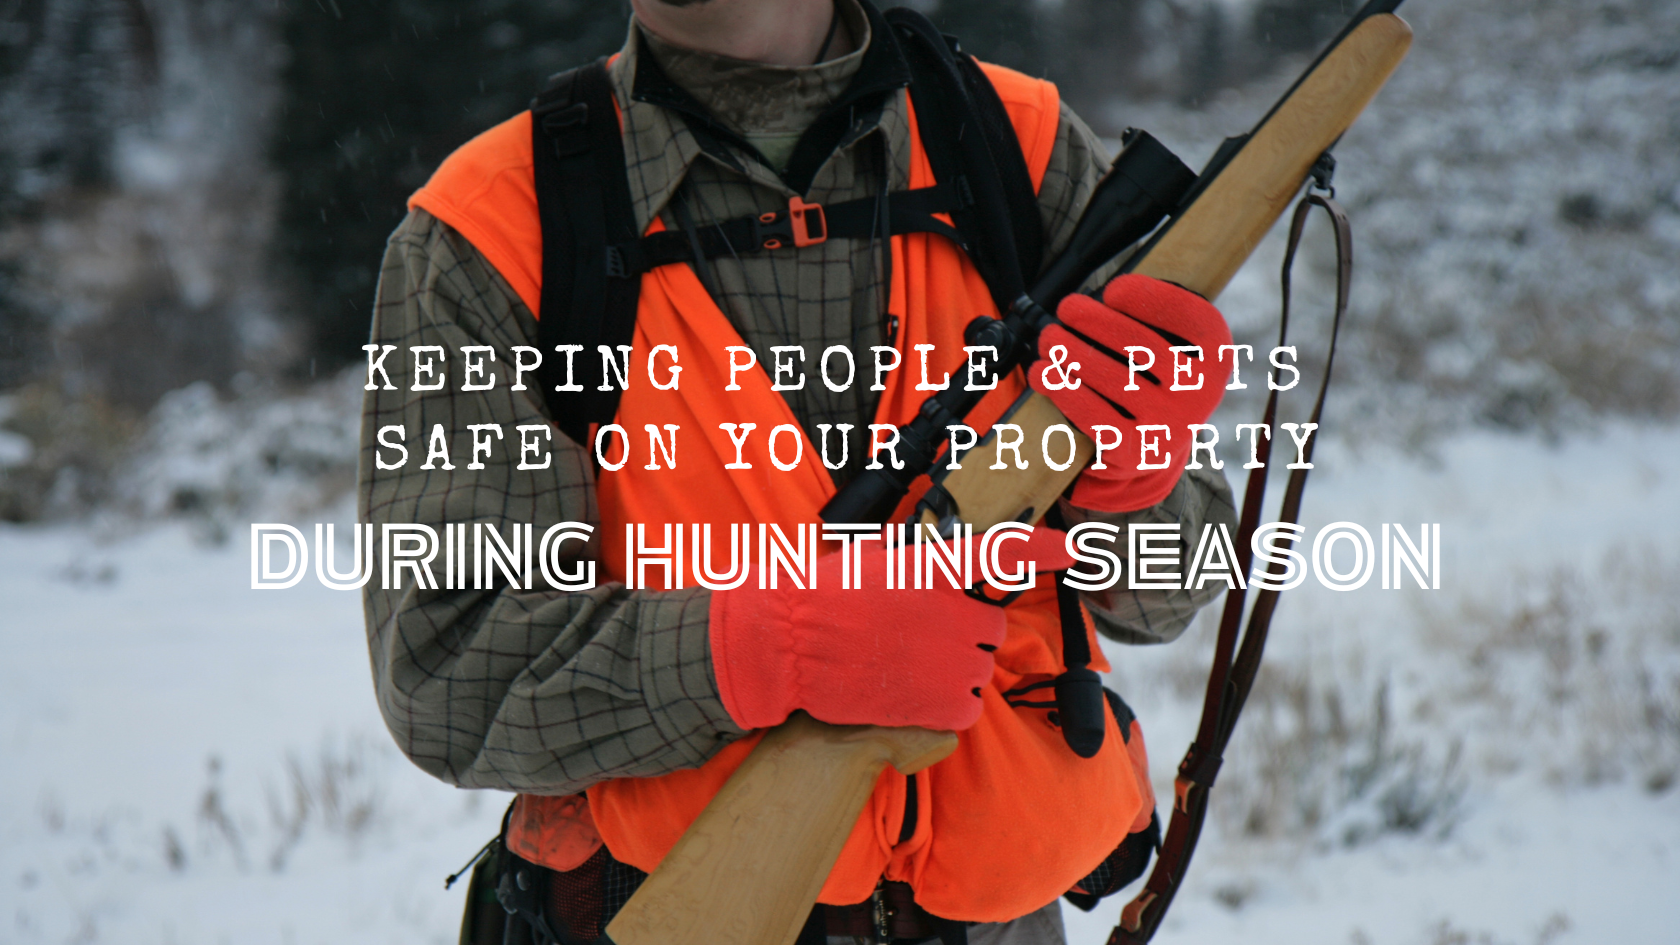 Keeping people & pets safe on your property during hunting season